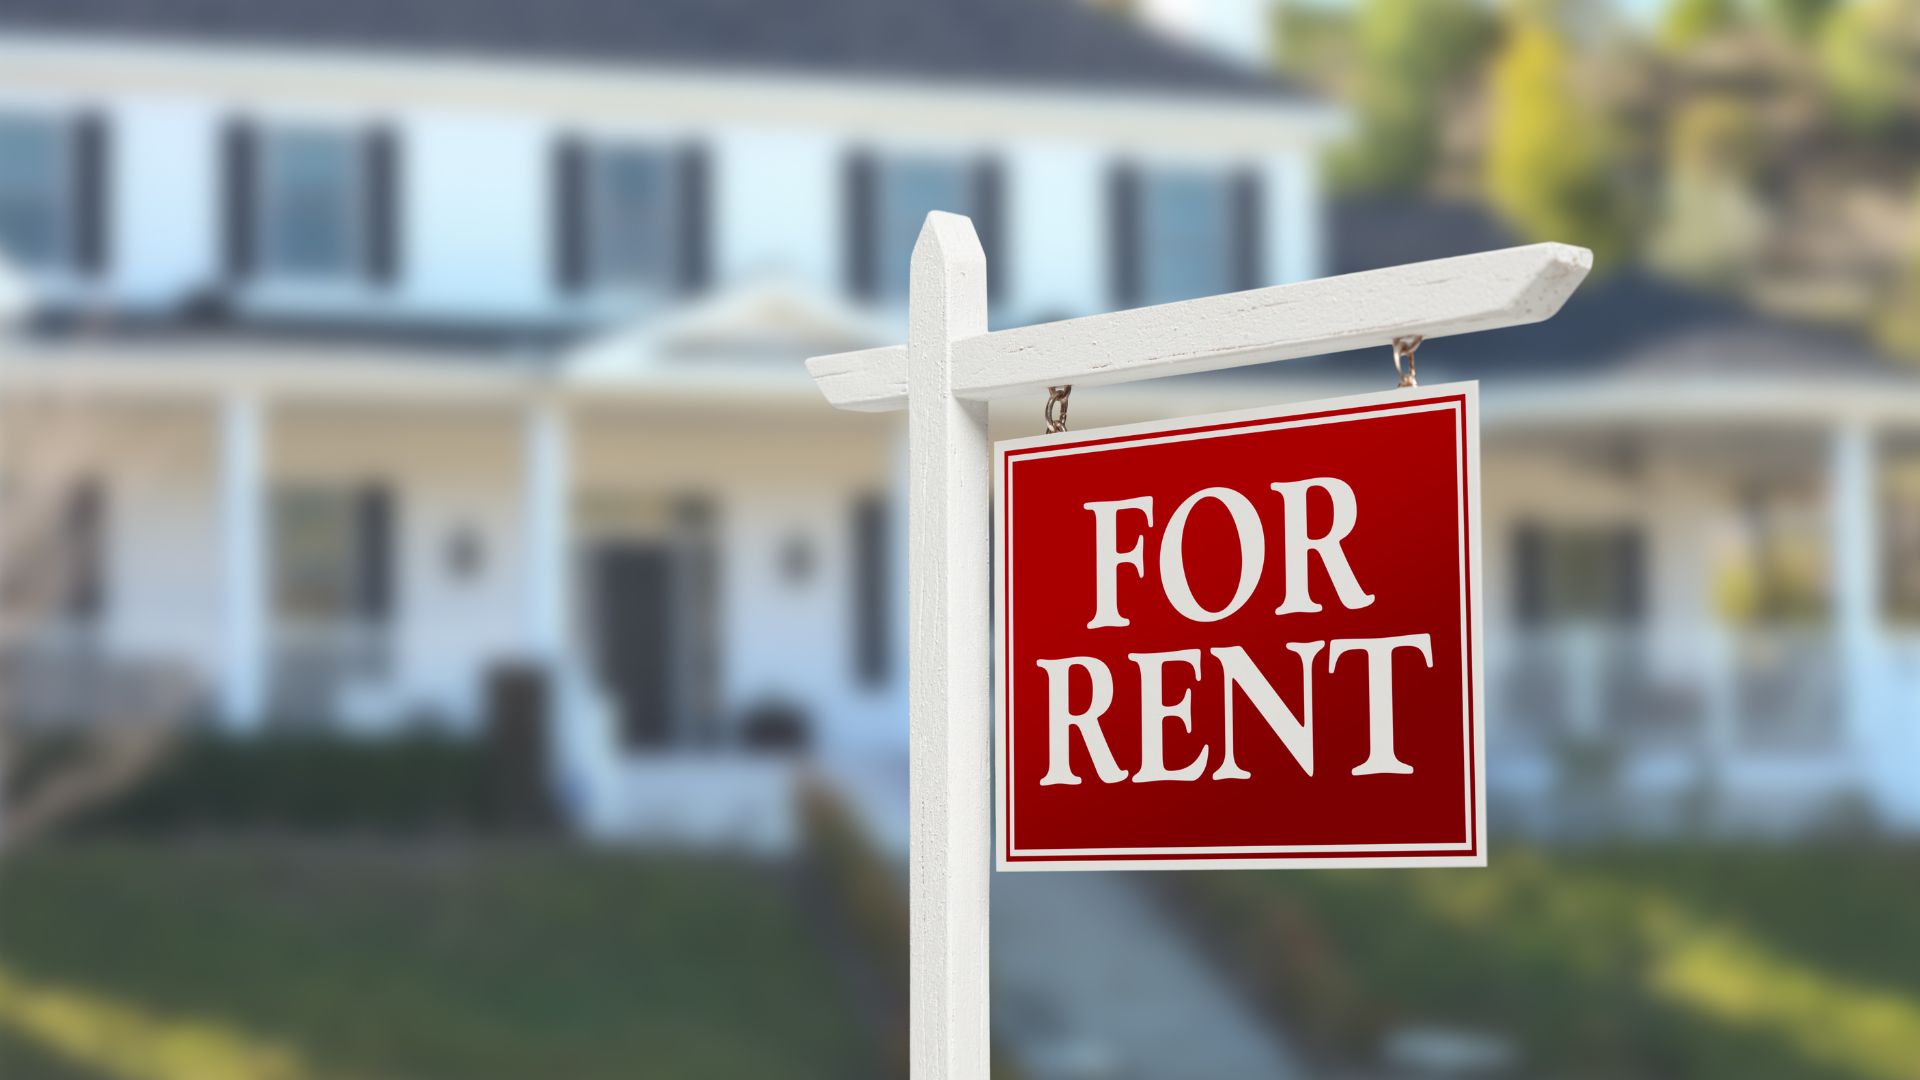 The Ultimate Guide to Your First Rental Property